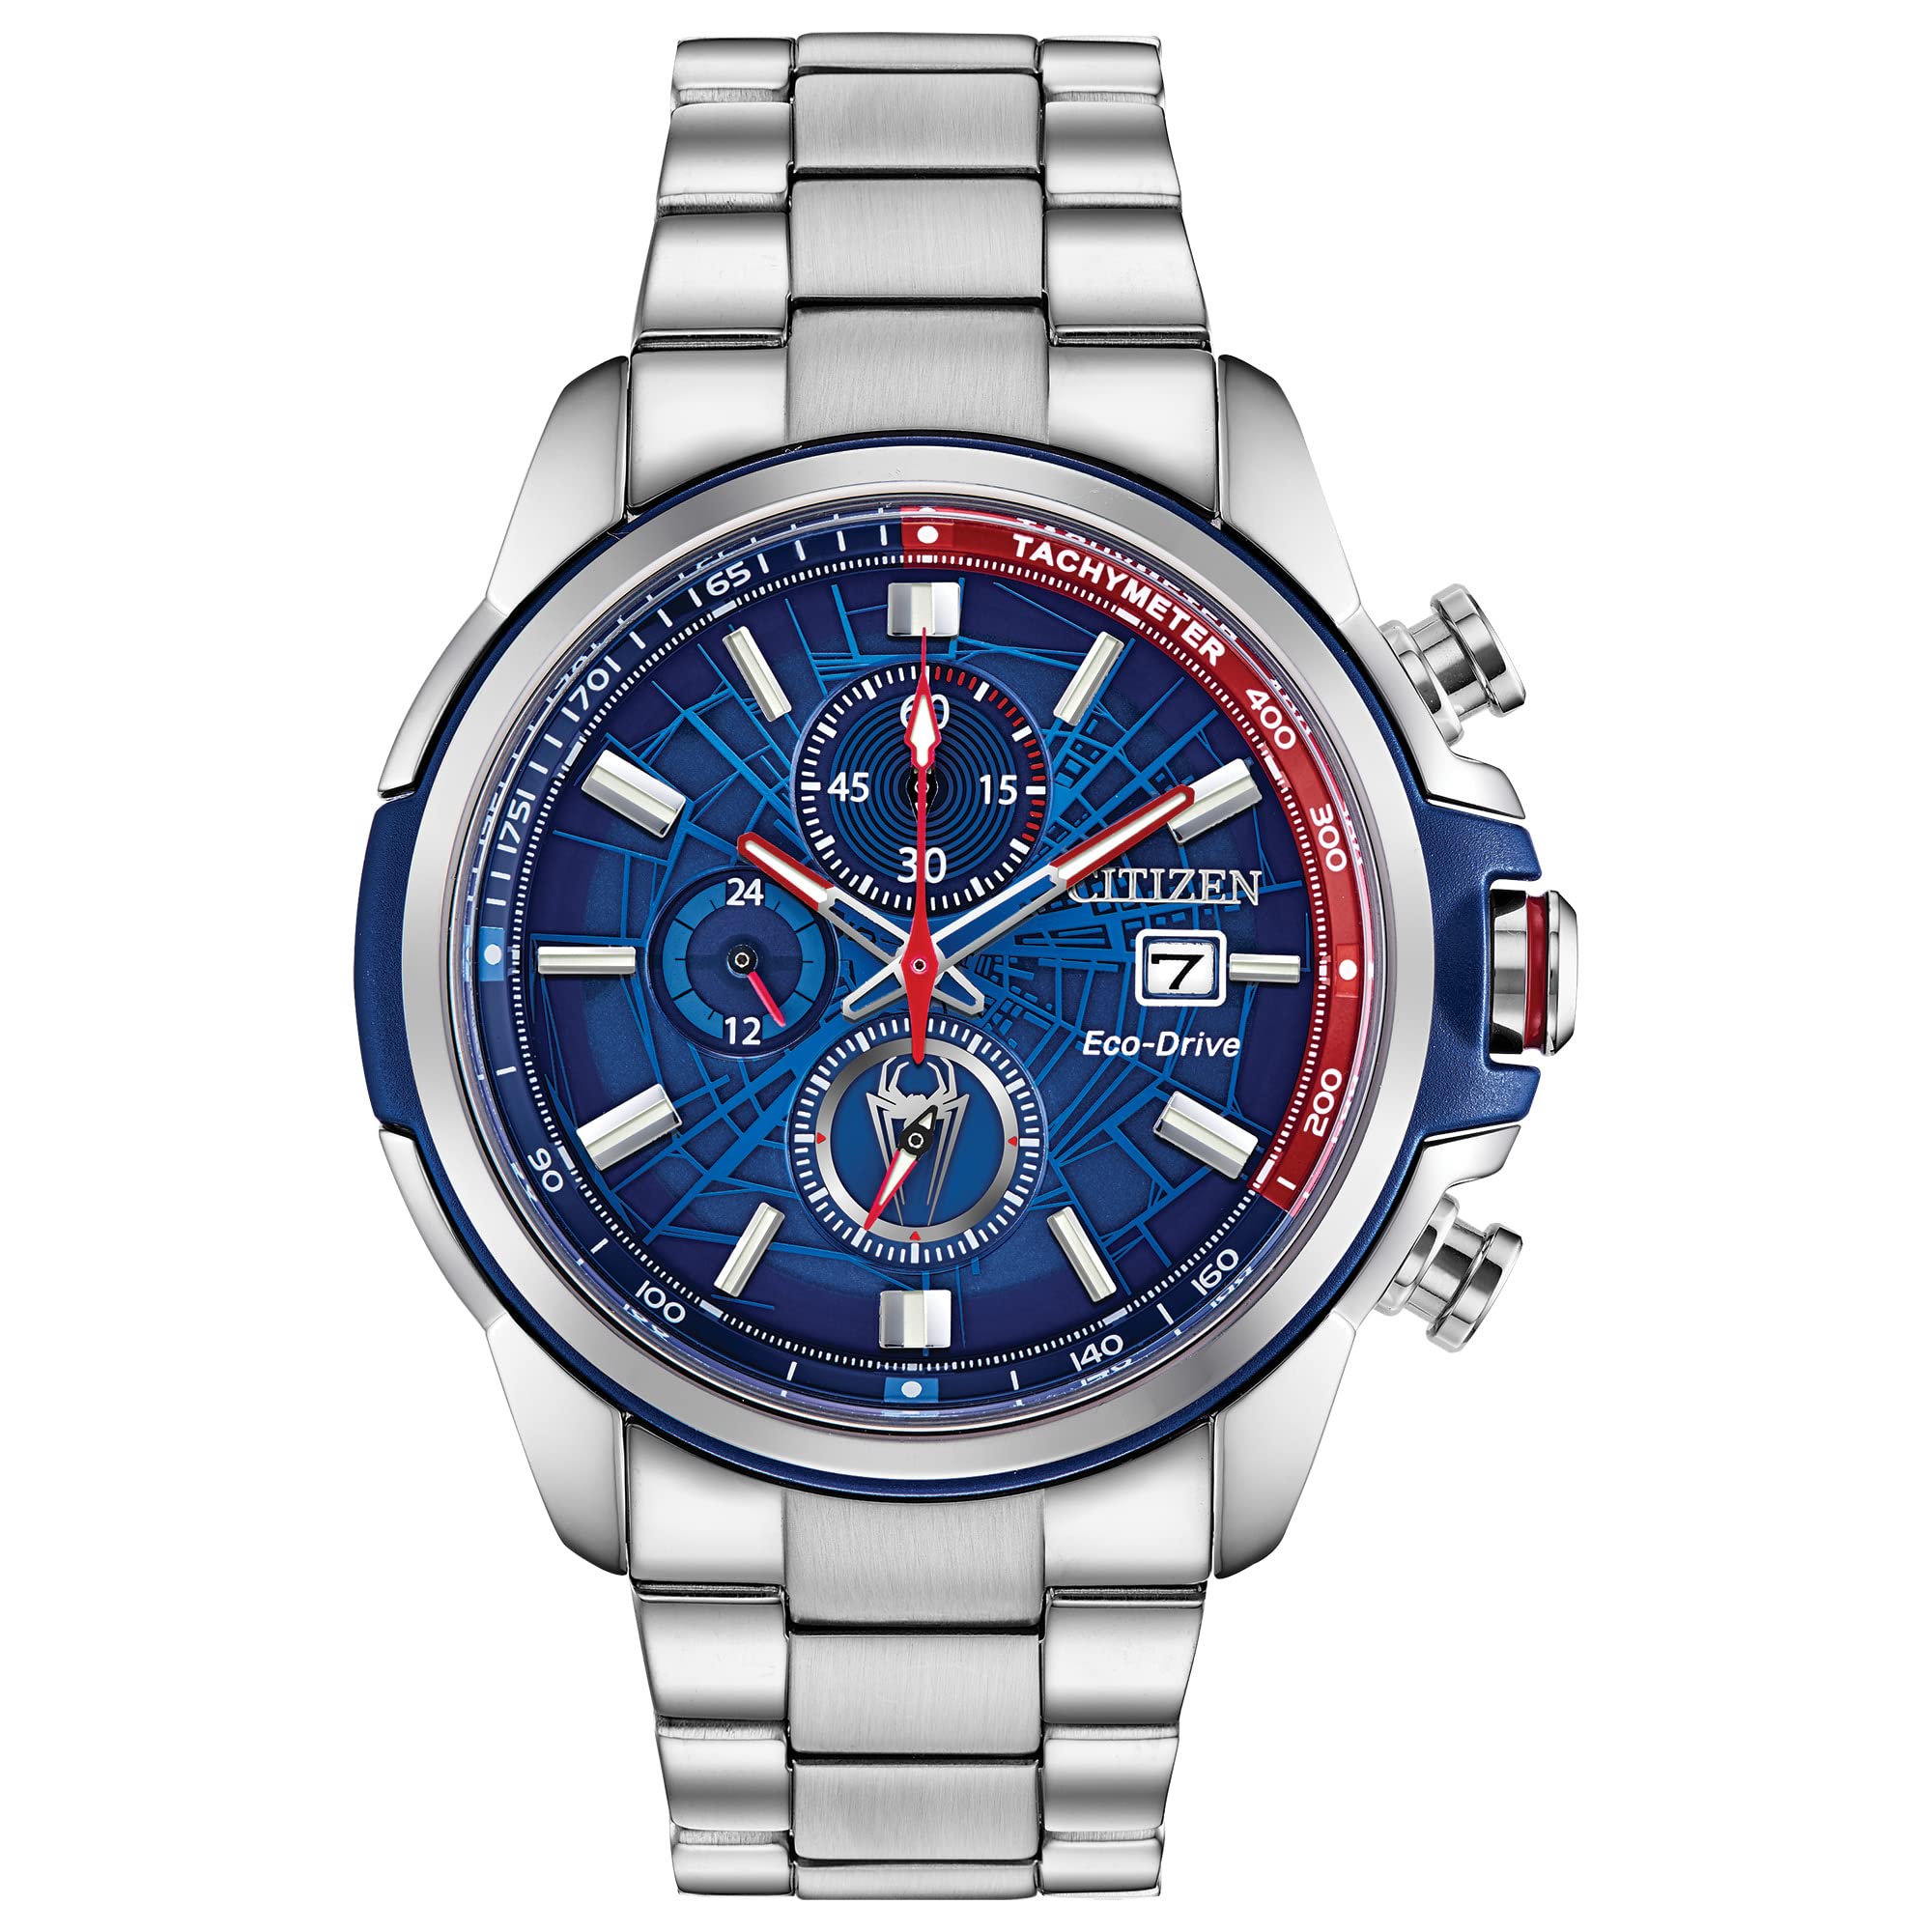 Citizen Men's Eco-Drive Marvel Spider Man Watch in Stainless Steel, Spider Man Art Blue and Red Dial (Model: CA0429-53W)